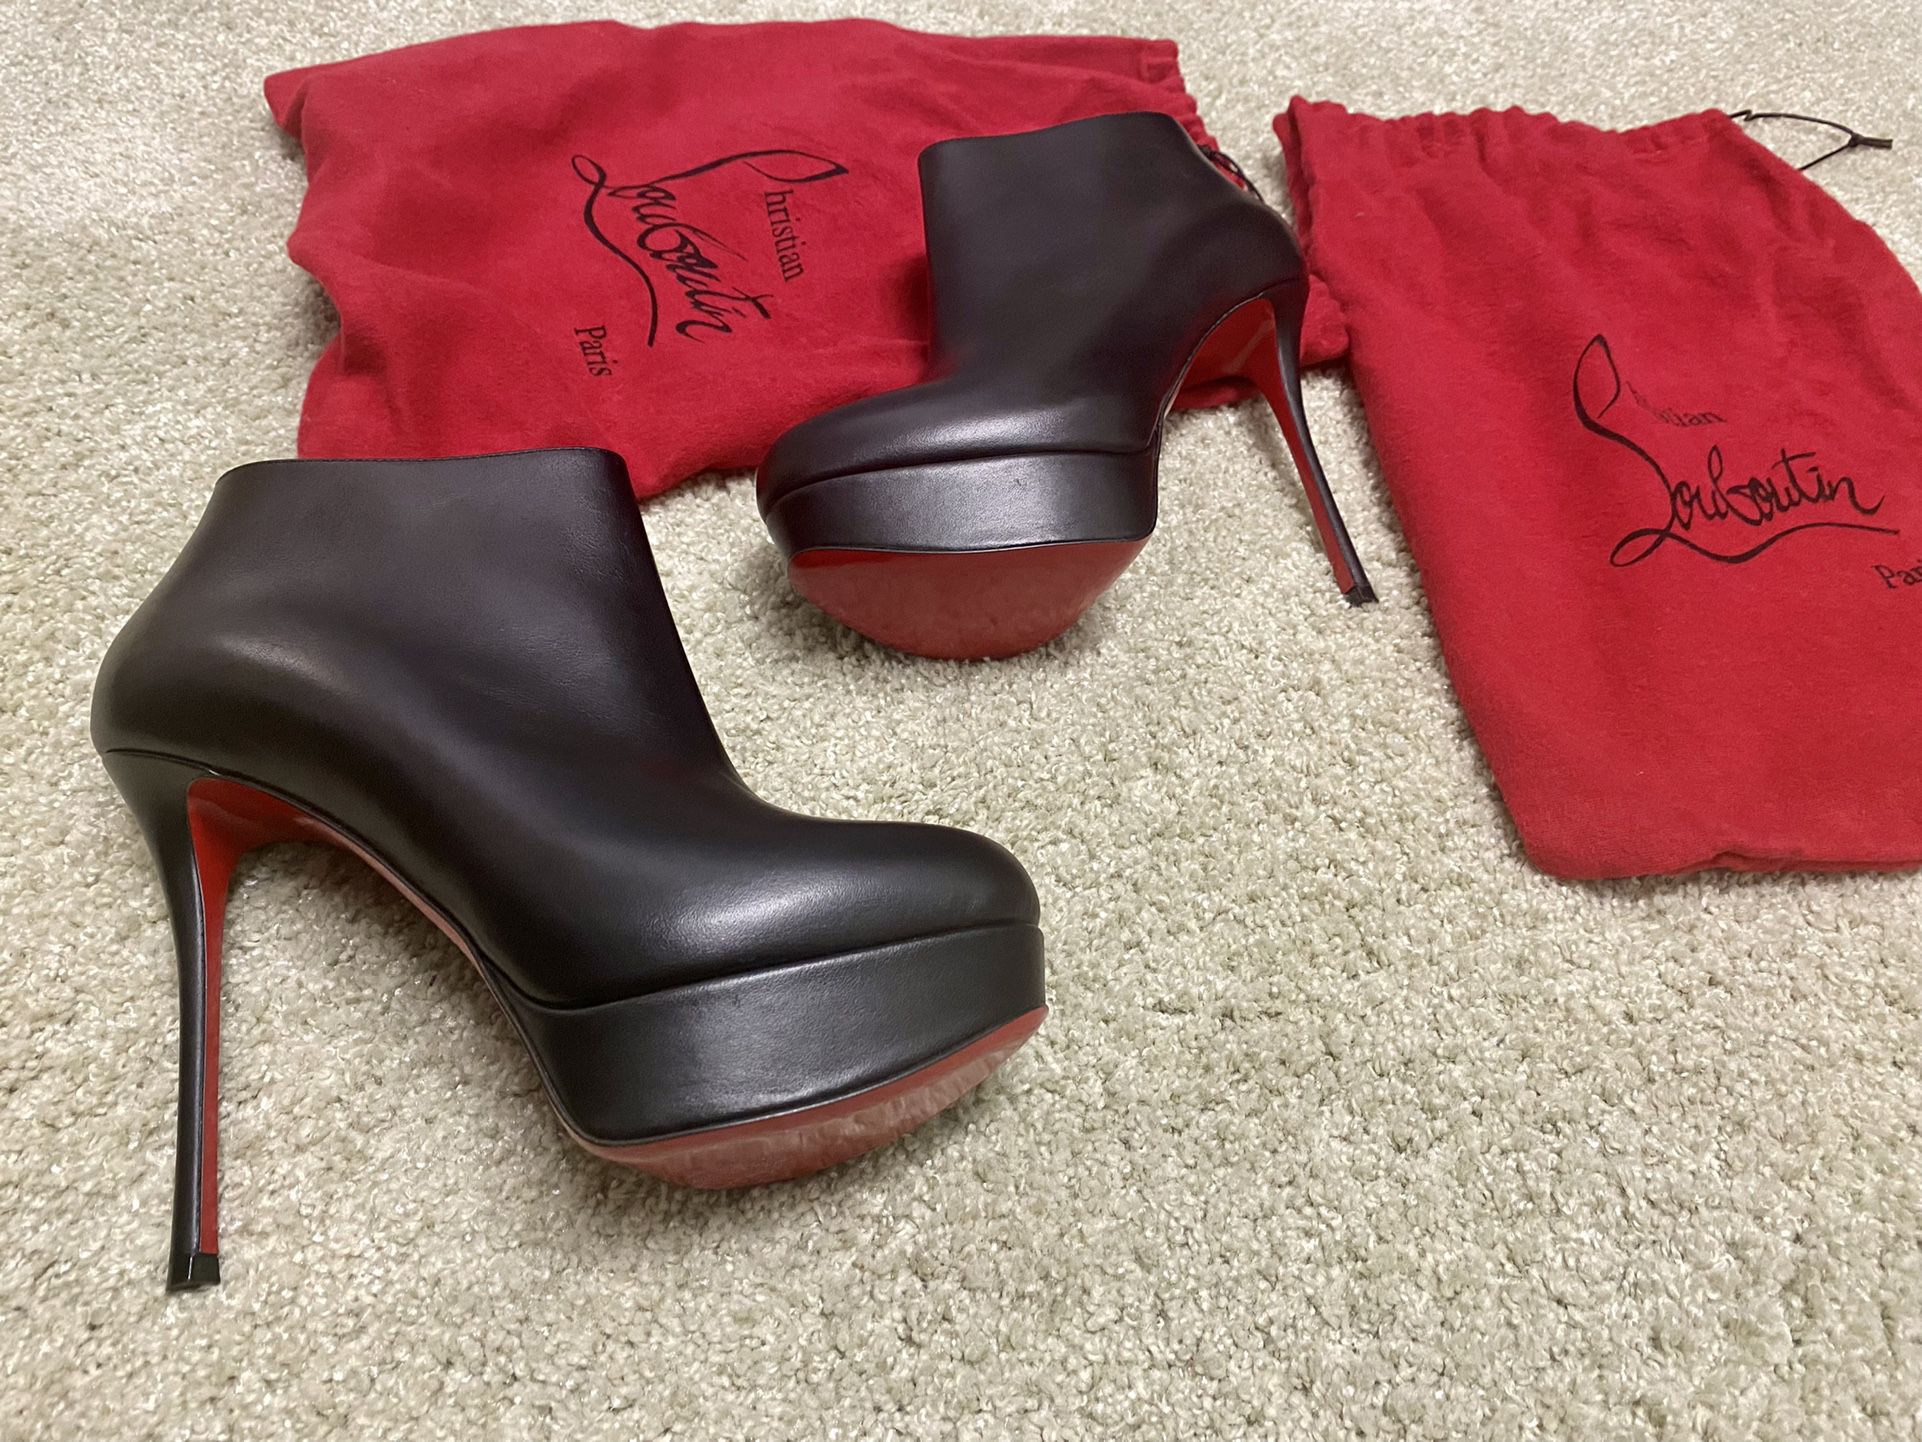 Christian louboutin Bianca Black leather platform Heels booties - size 38 - brand new never worn- with dustbags